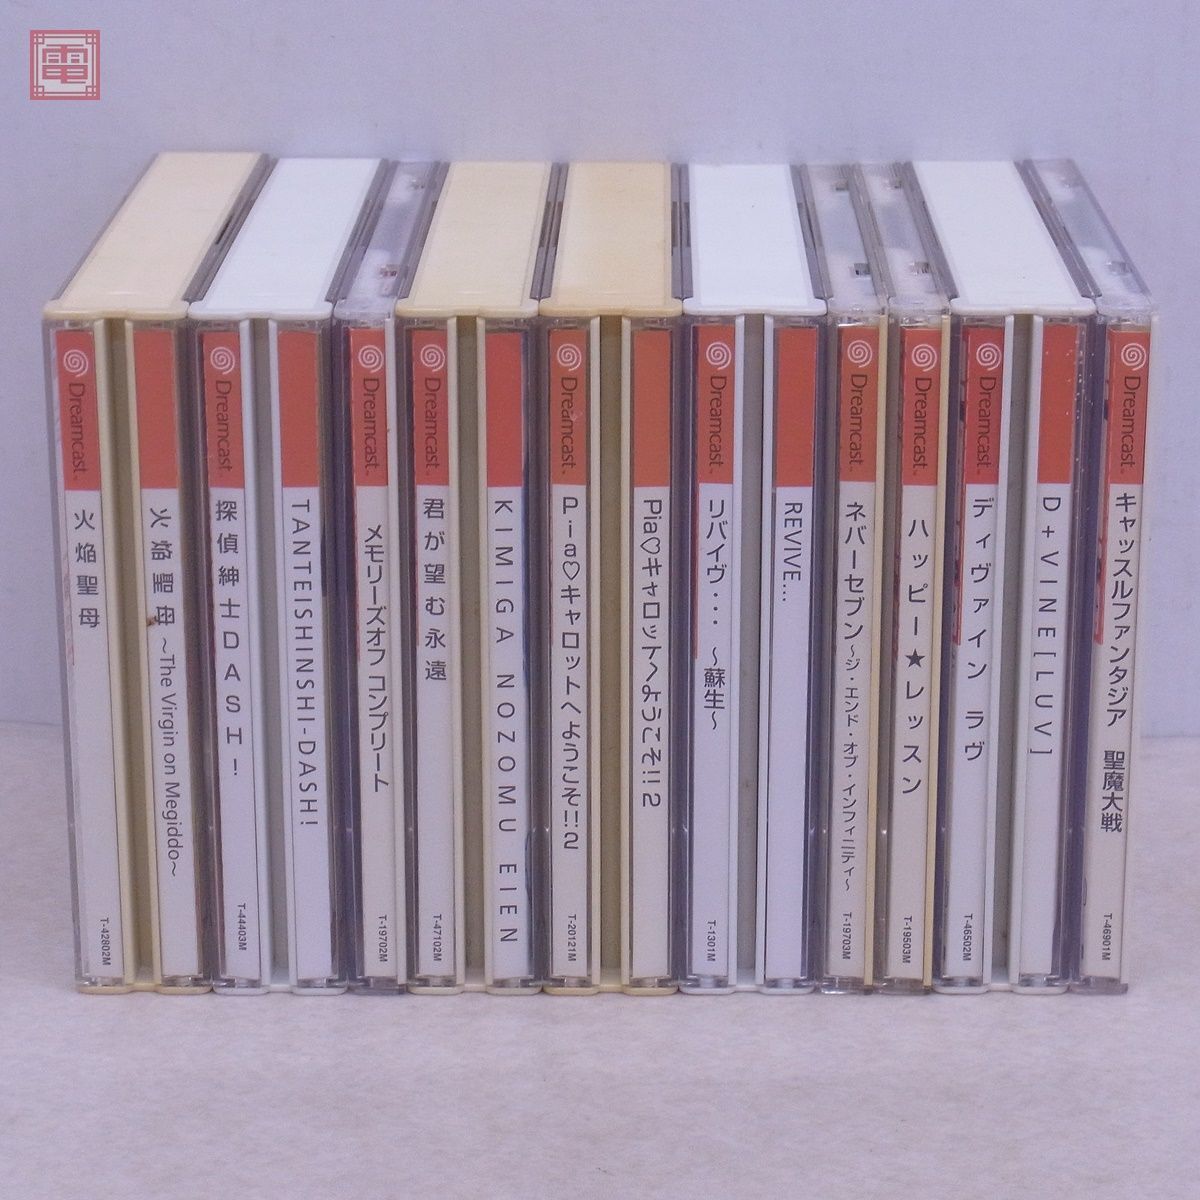  operation guarantee goods DC Dreamcast fire .../.. gentleman DASH!/ memory z off Complete etc. beautiful young lady series together 10 pcs set box opinion attaching [10